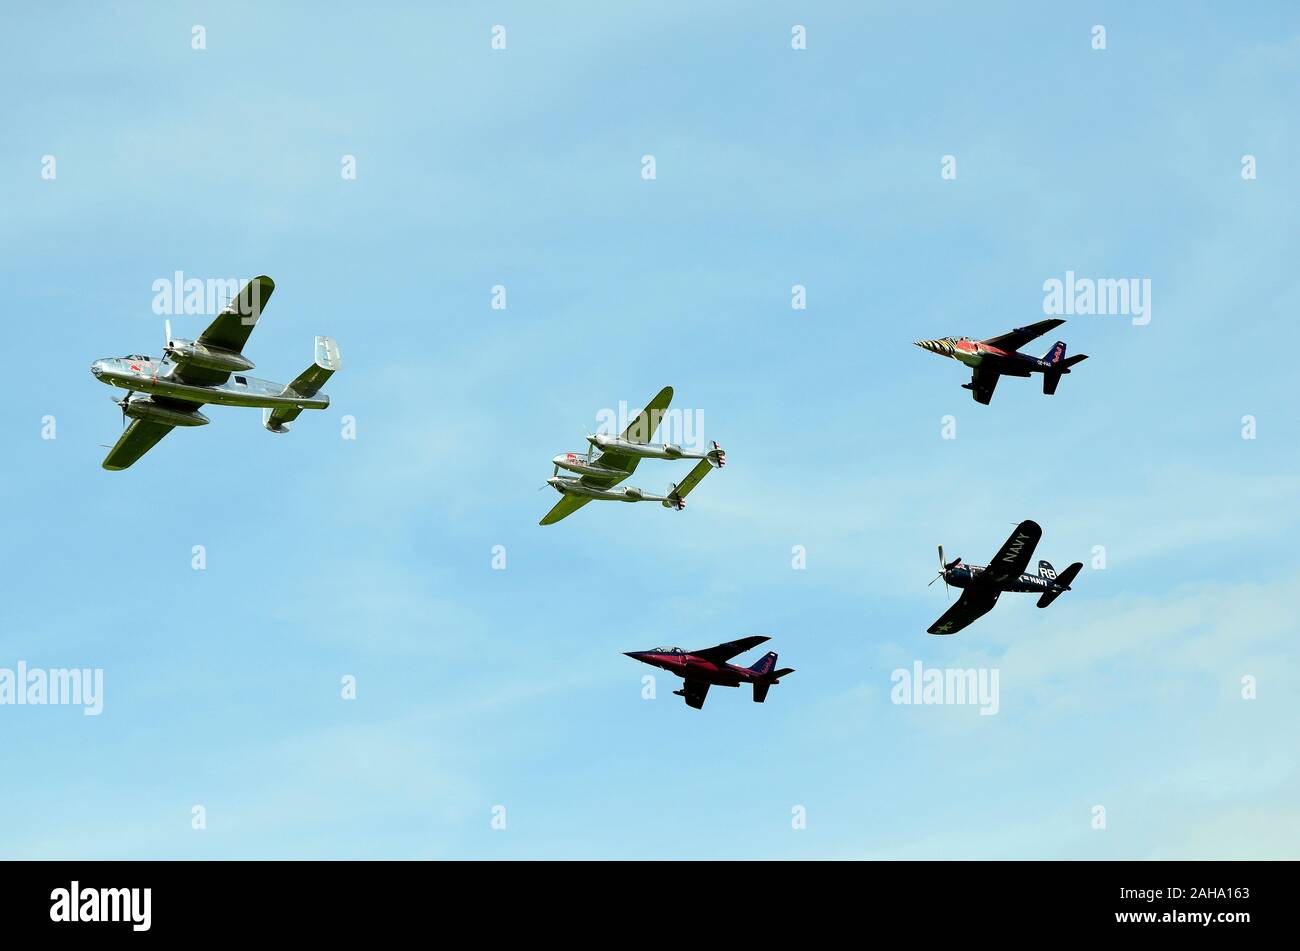 Zeltweg, Styria, Austria - September 02, 2016:  formation flight of Flying Bulls with Alpha Jet and vintage WWII fighter aircrafts P38 Lockheed, B-25 Stock Photo